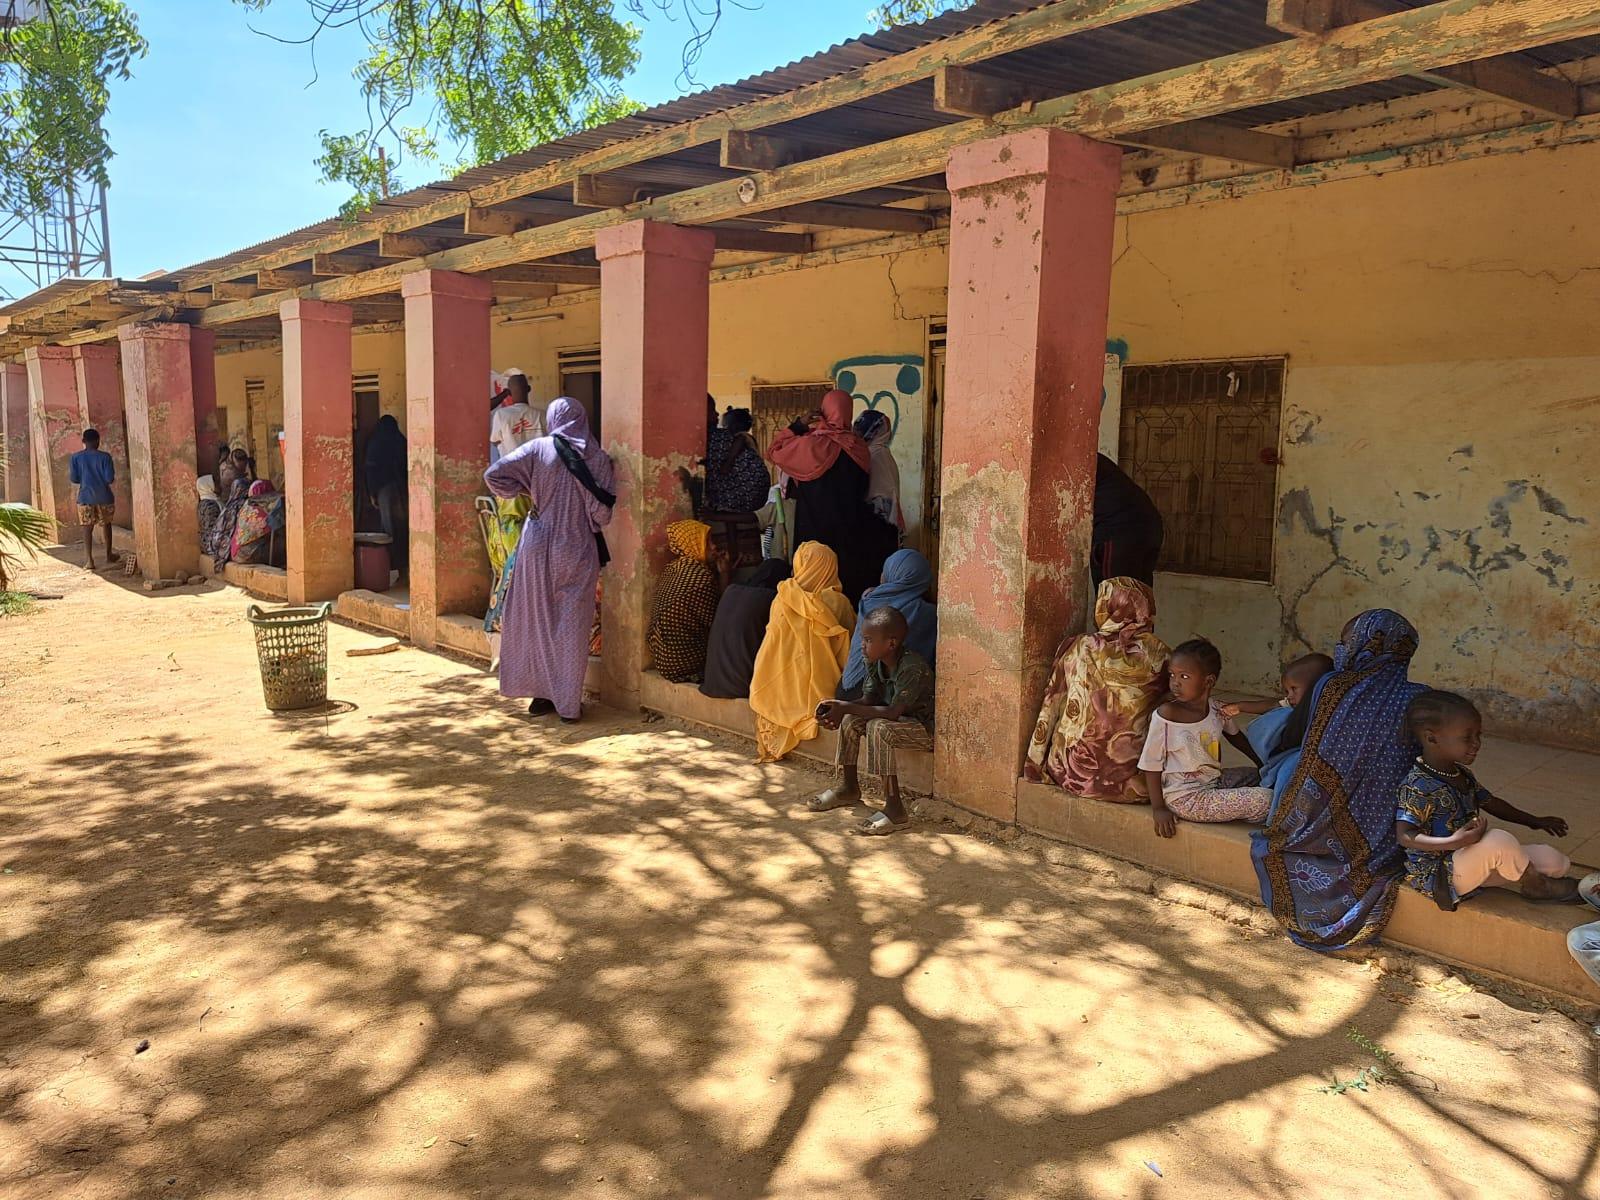 Yesterday, in Wad Madani, Sudan, an MSF team started providing lifesaving healthcare through mobile clinics for hundreds of displaced people fleeing violence in Khartoum. 